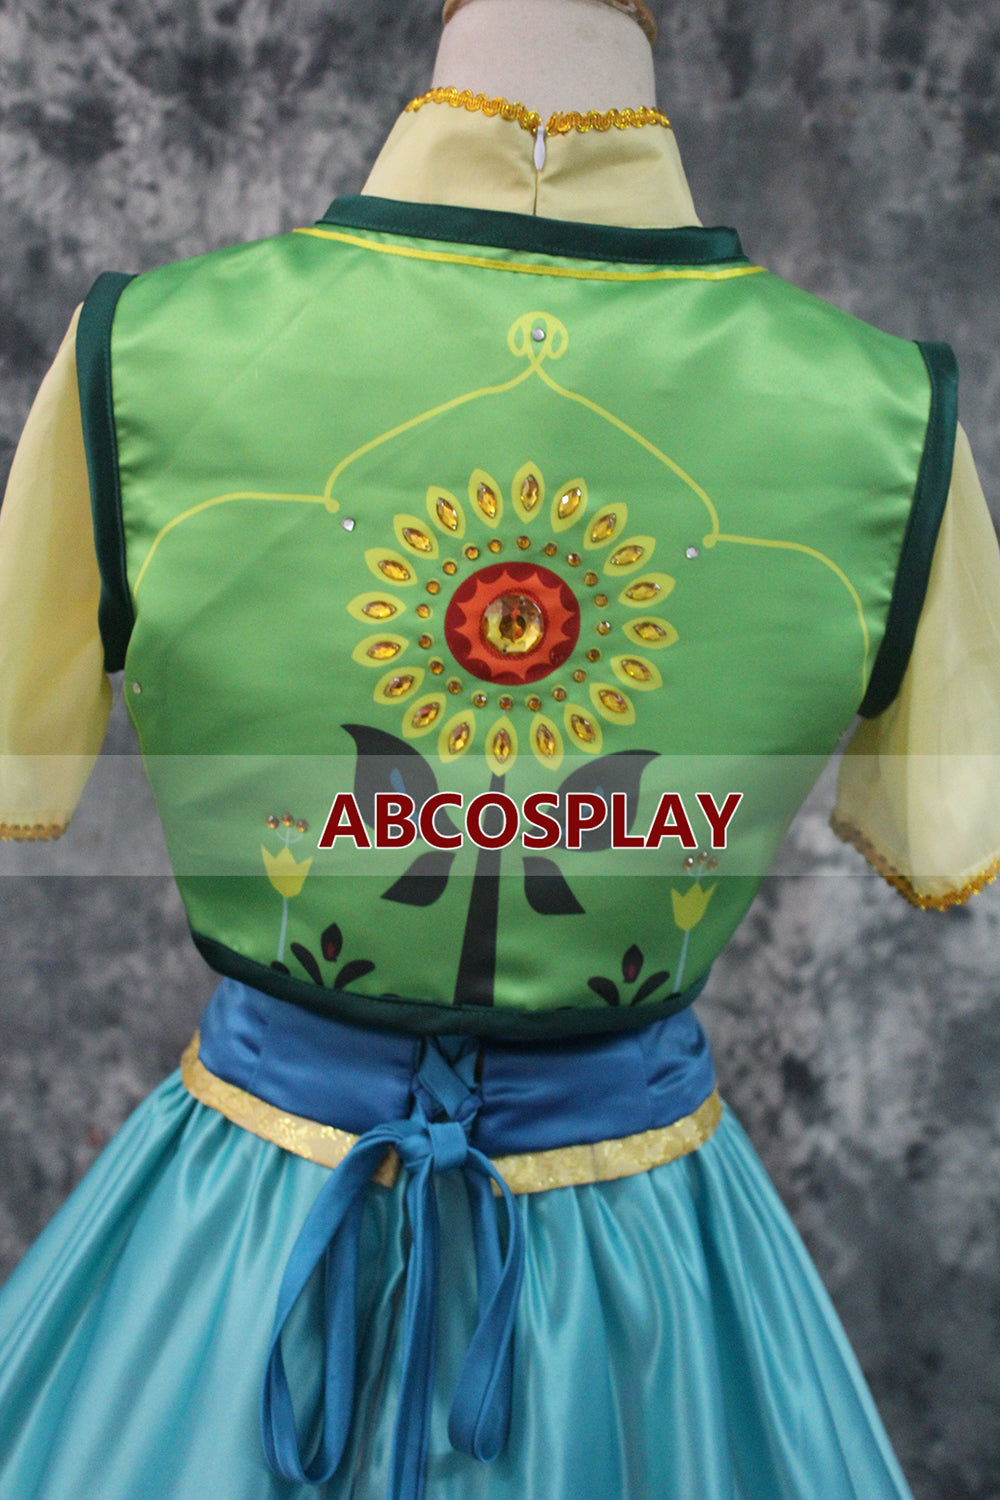 Frozen Fever Anna Printed Dress Cosplay Costume